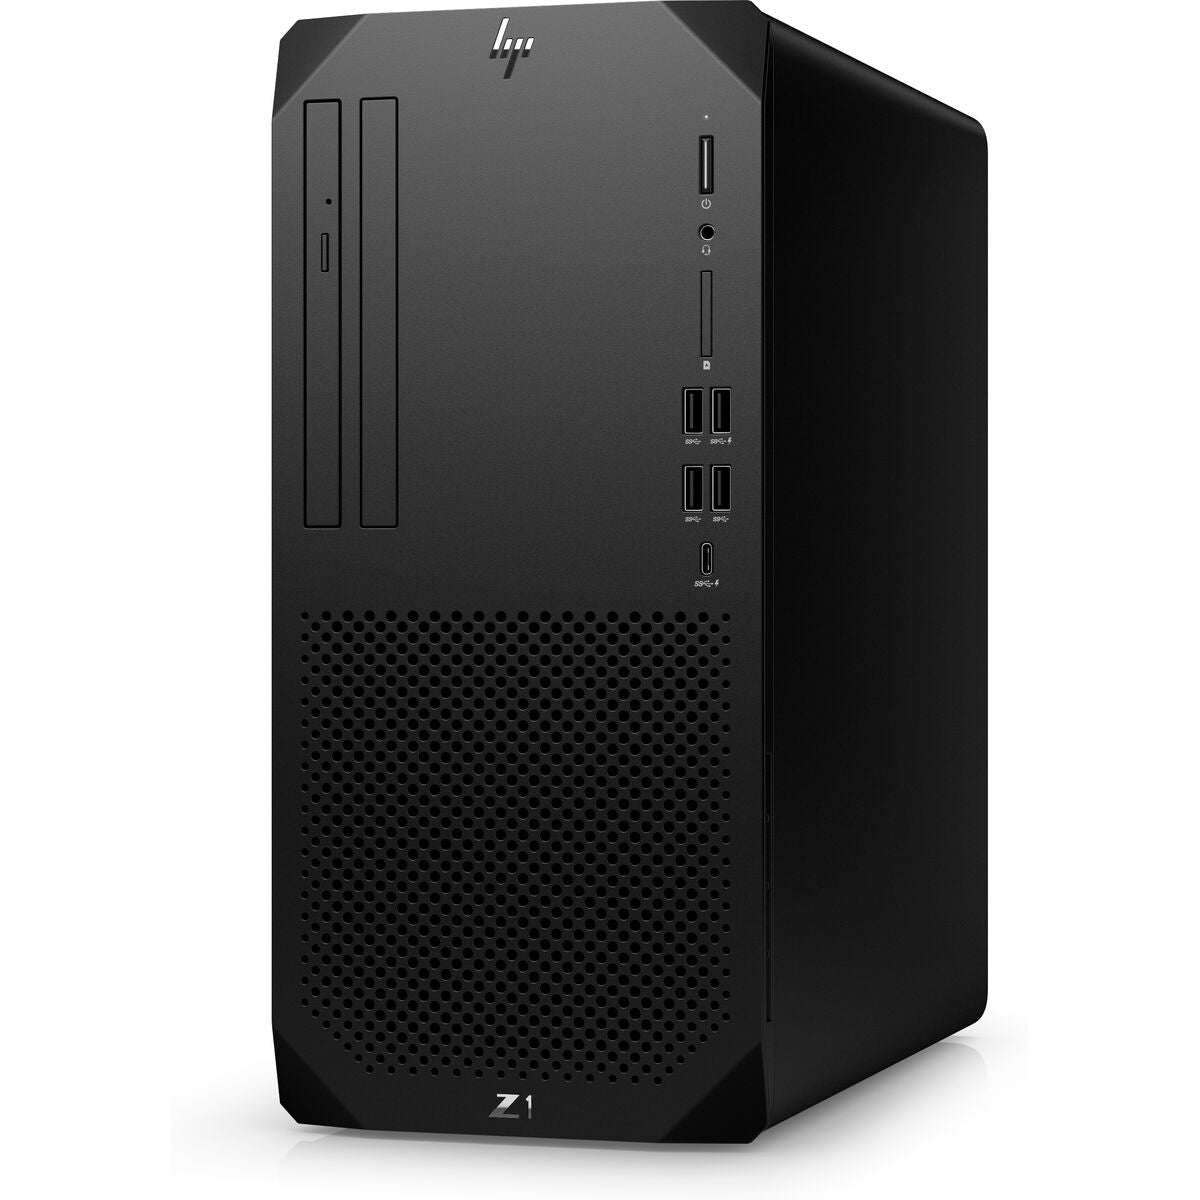 Desktop PC HP Z1 G9 Intel Core i7-14700 16 GB RAM 512 GB SSD, HP, Computing, Desktops, desktop-pc-hp-z1-g9-intel-core-i7-14700-16-gb-ram-512-gb-ssd, Brand_HP, category-reference-2609, category-reference-2791, category-reference-2792, category-reference-t-19685, category-reference-t-19903, category-reference-t-21381, computers / components, Condition_NEW, office, Price_+ 1000, Teleworking, RiotNook